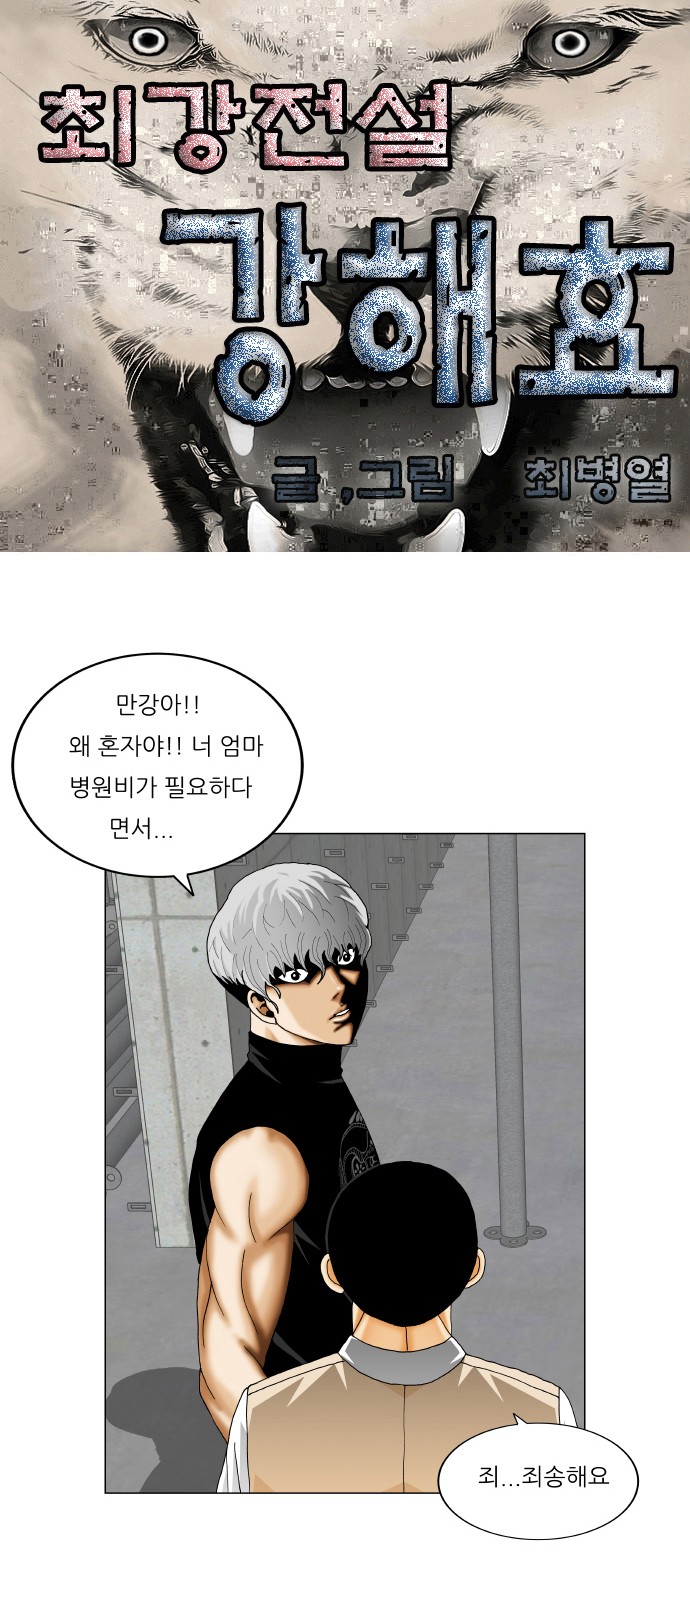 Ultimate Legend - Kang Hae Hyo - Chapter 349 - Page 1